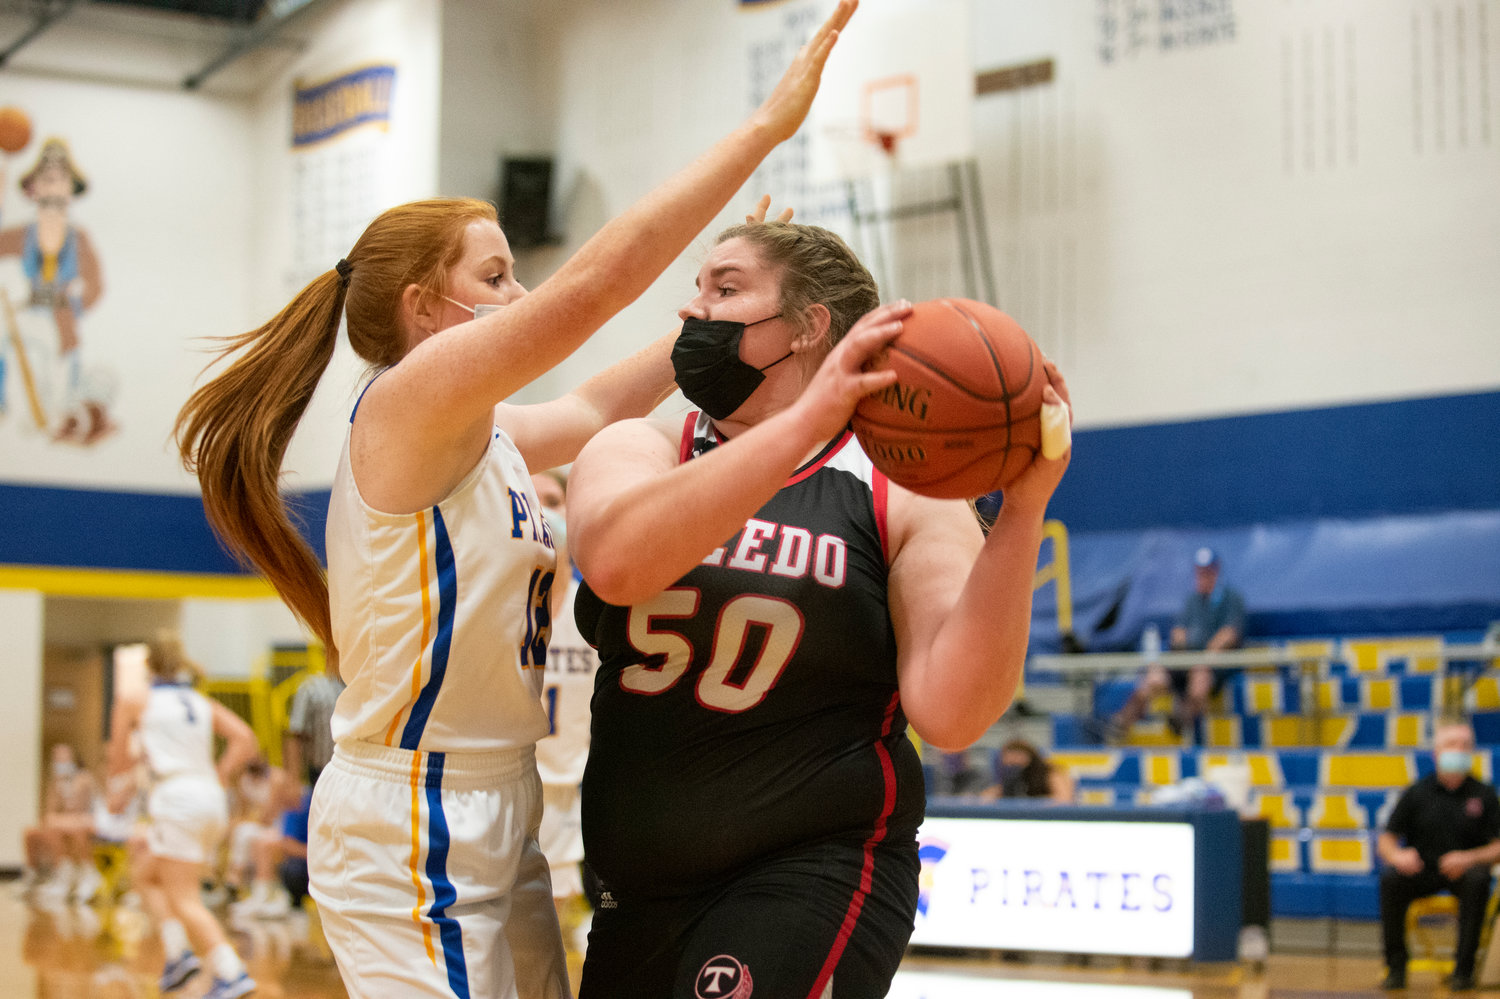 Toledo's Taylor Langhaim (50) looks for an open pass against Adna's Natalie Loose (12) after hauling in a defensive rebound.